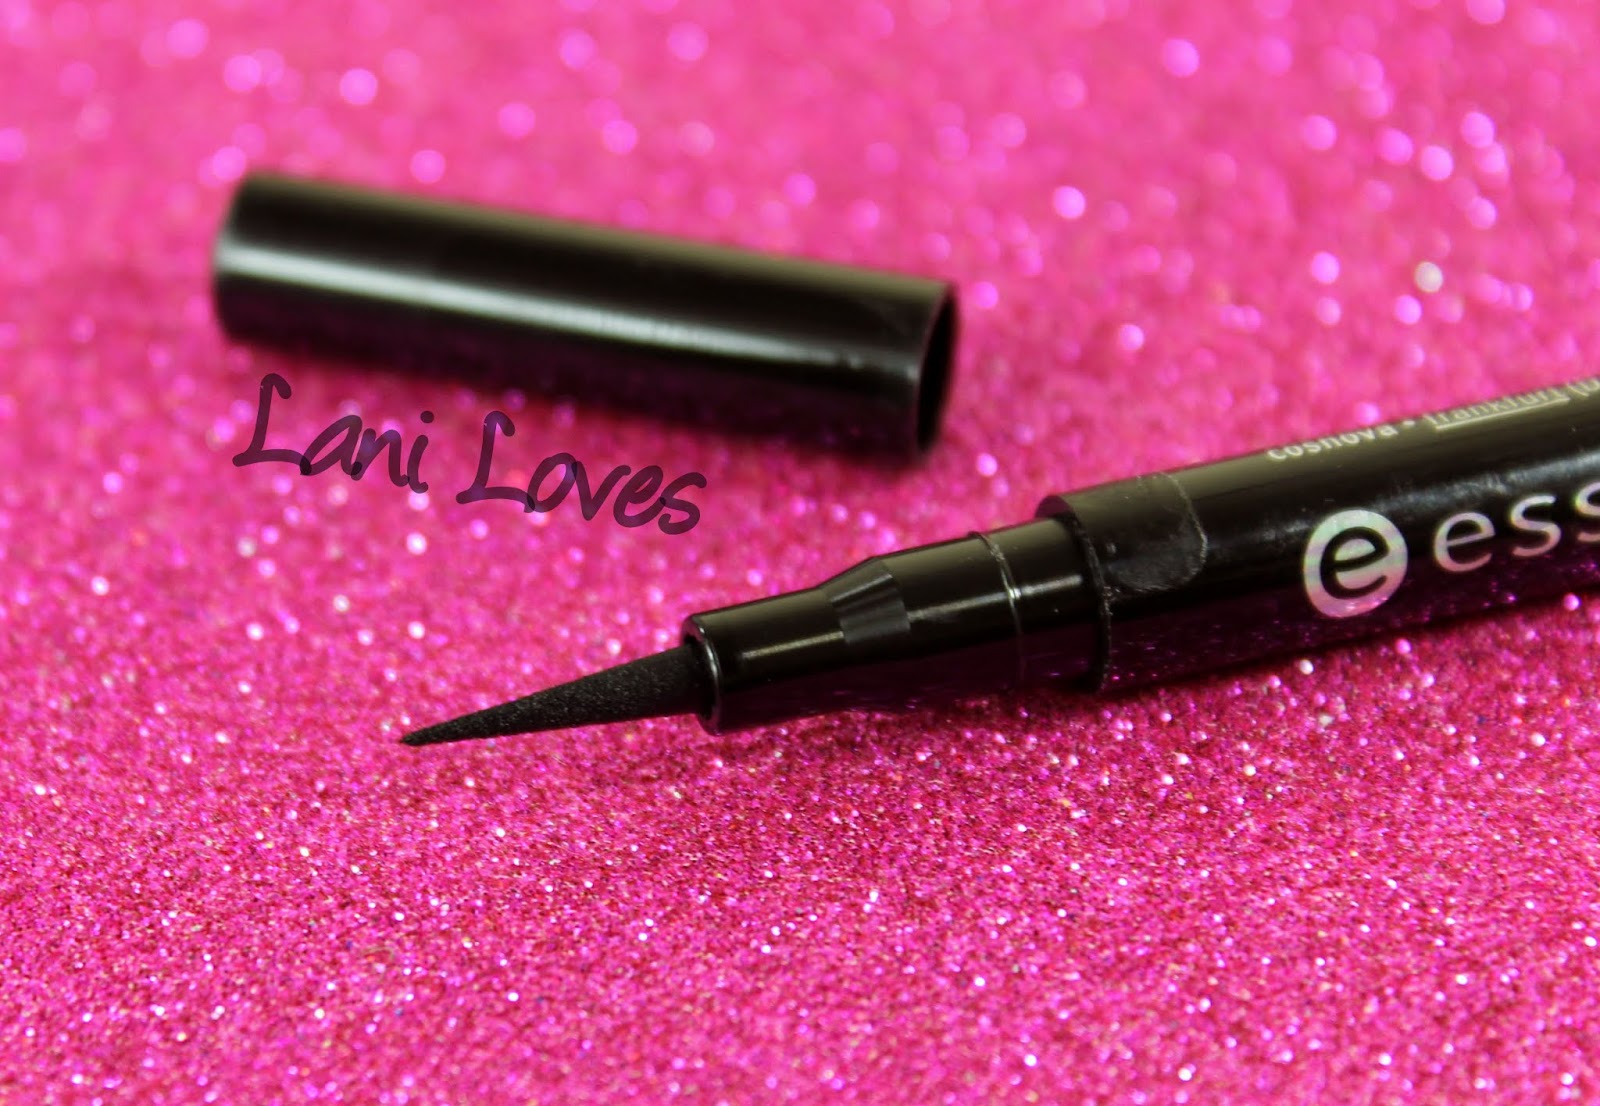 Essence Superfine Eyeliner Pen Swatches & Review